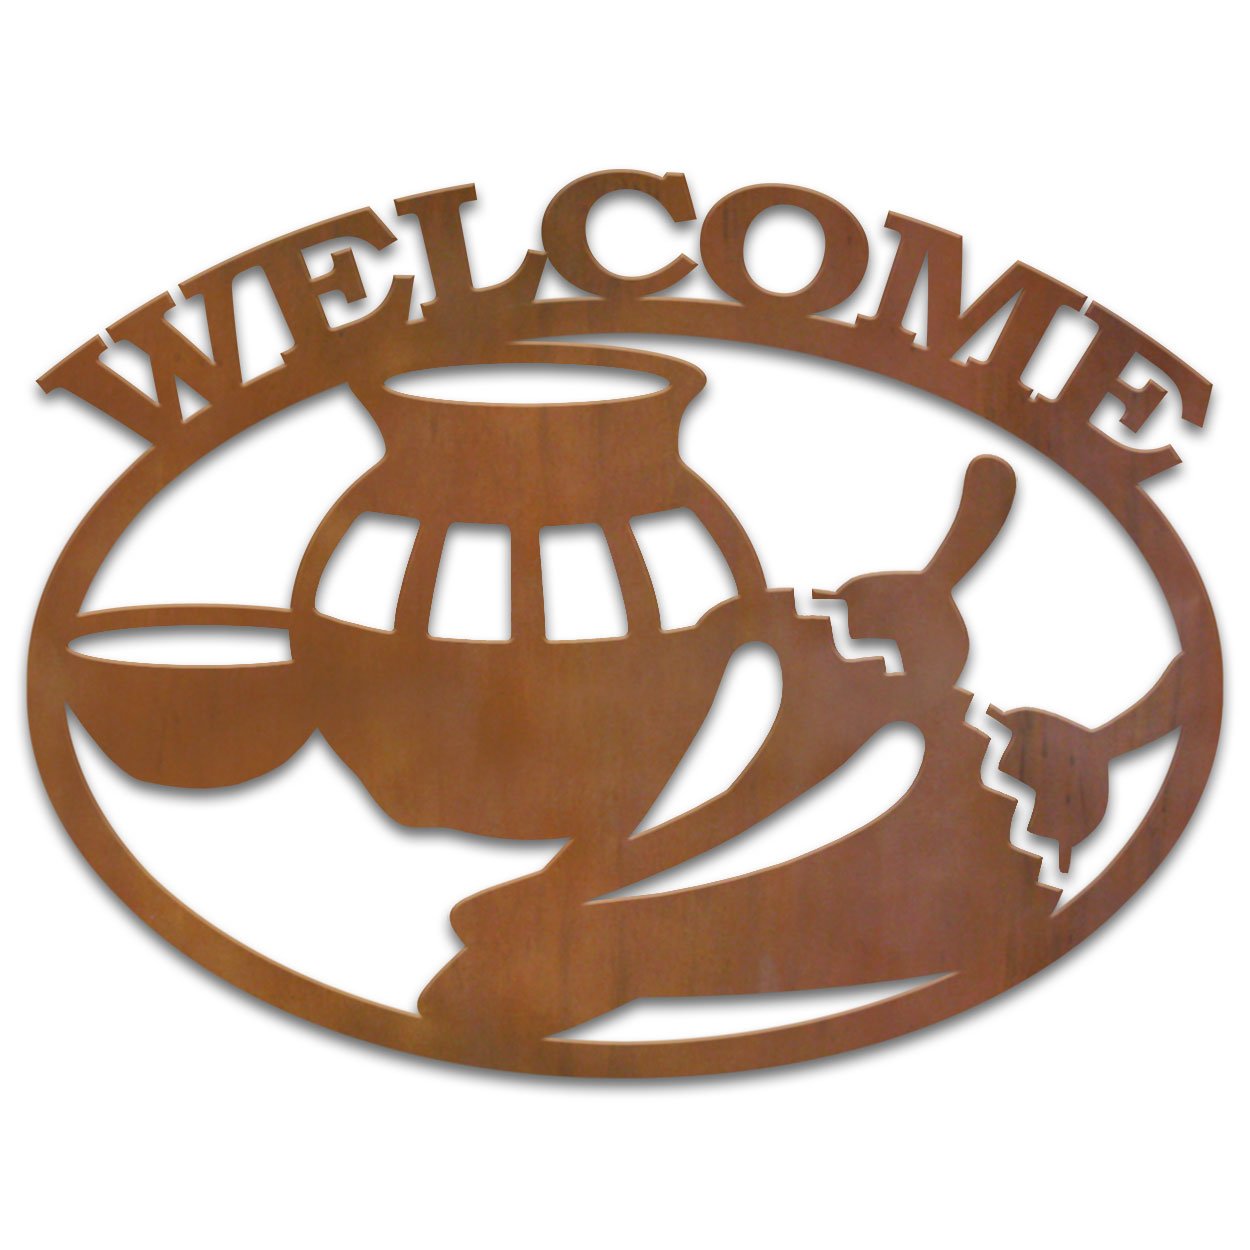 600108 - Peppers and Pots Metal Welcome Sign Wall Art